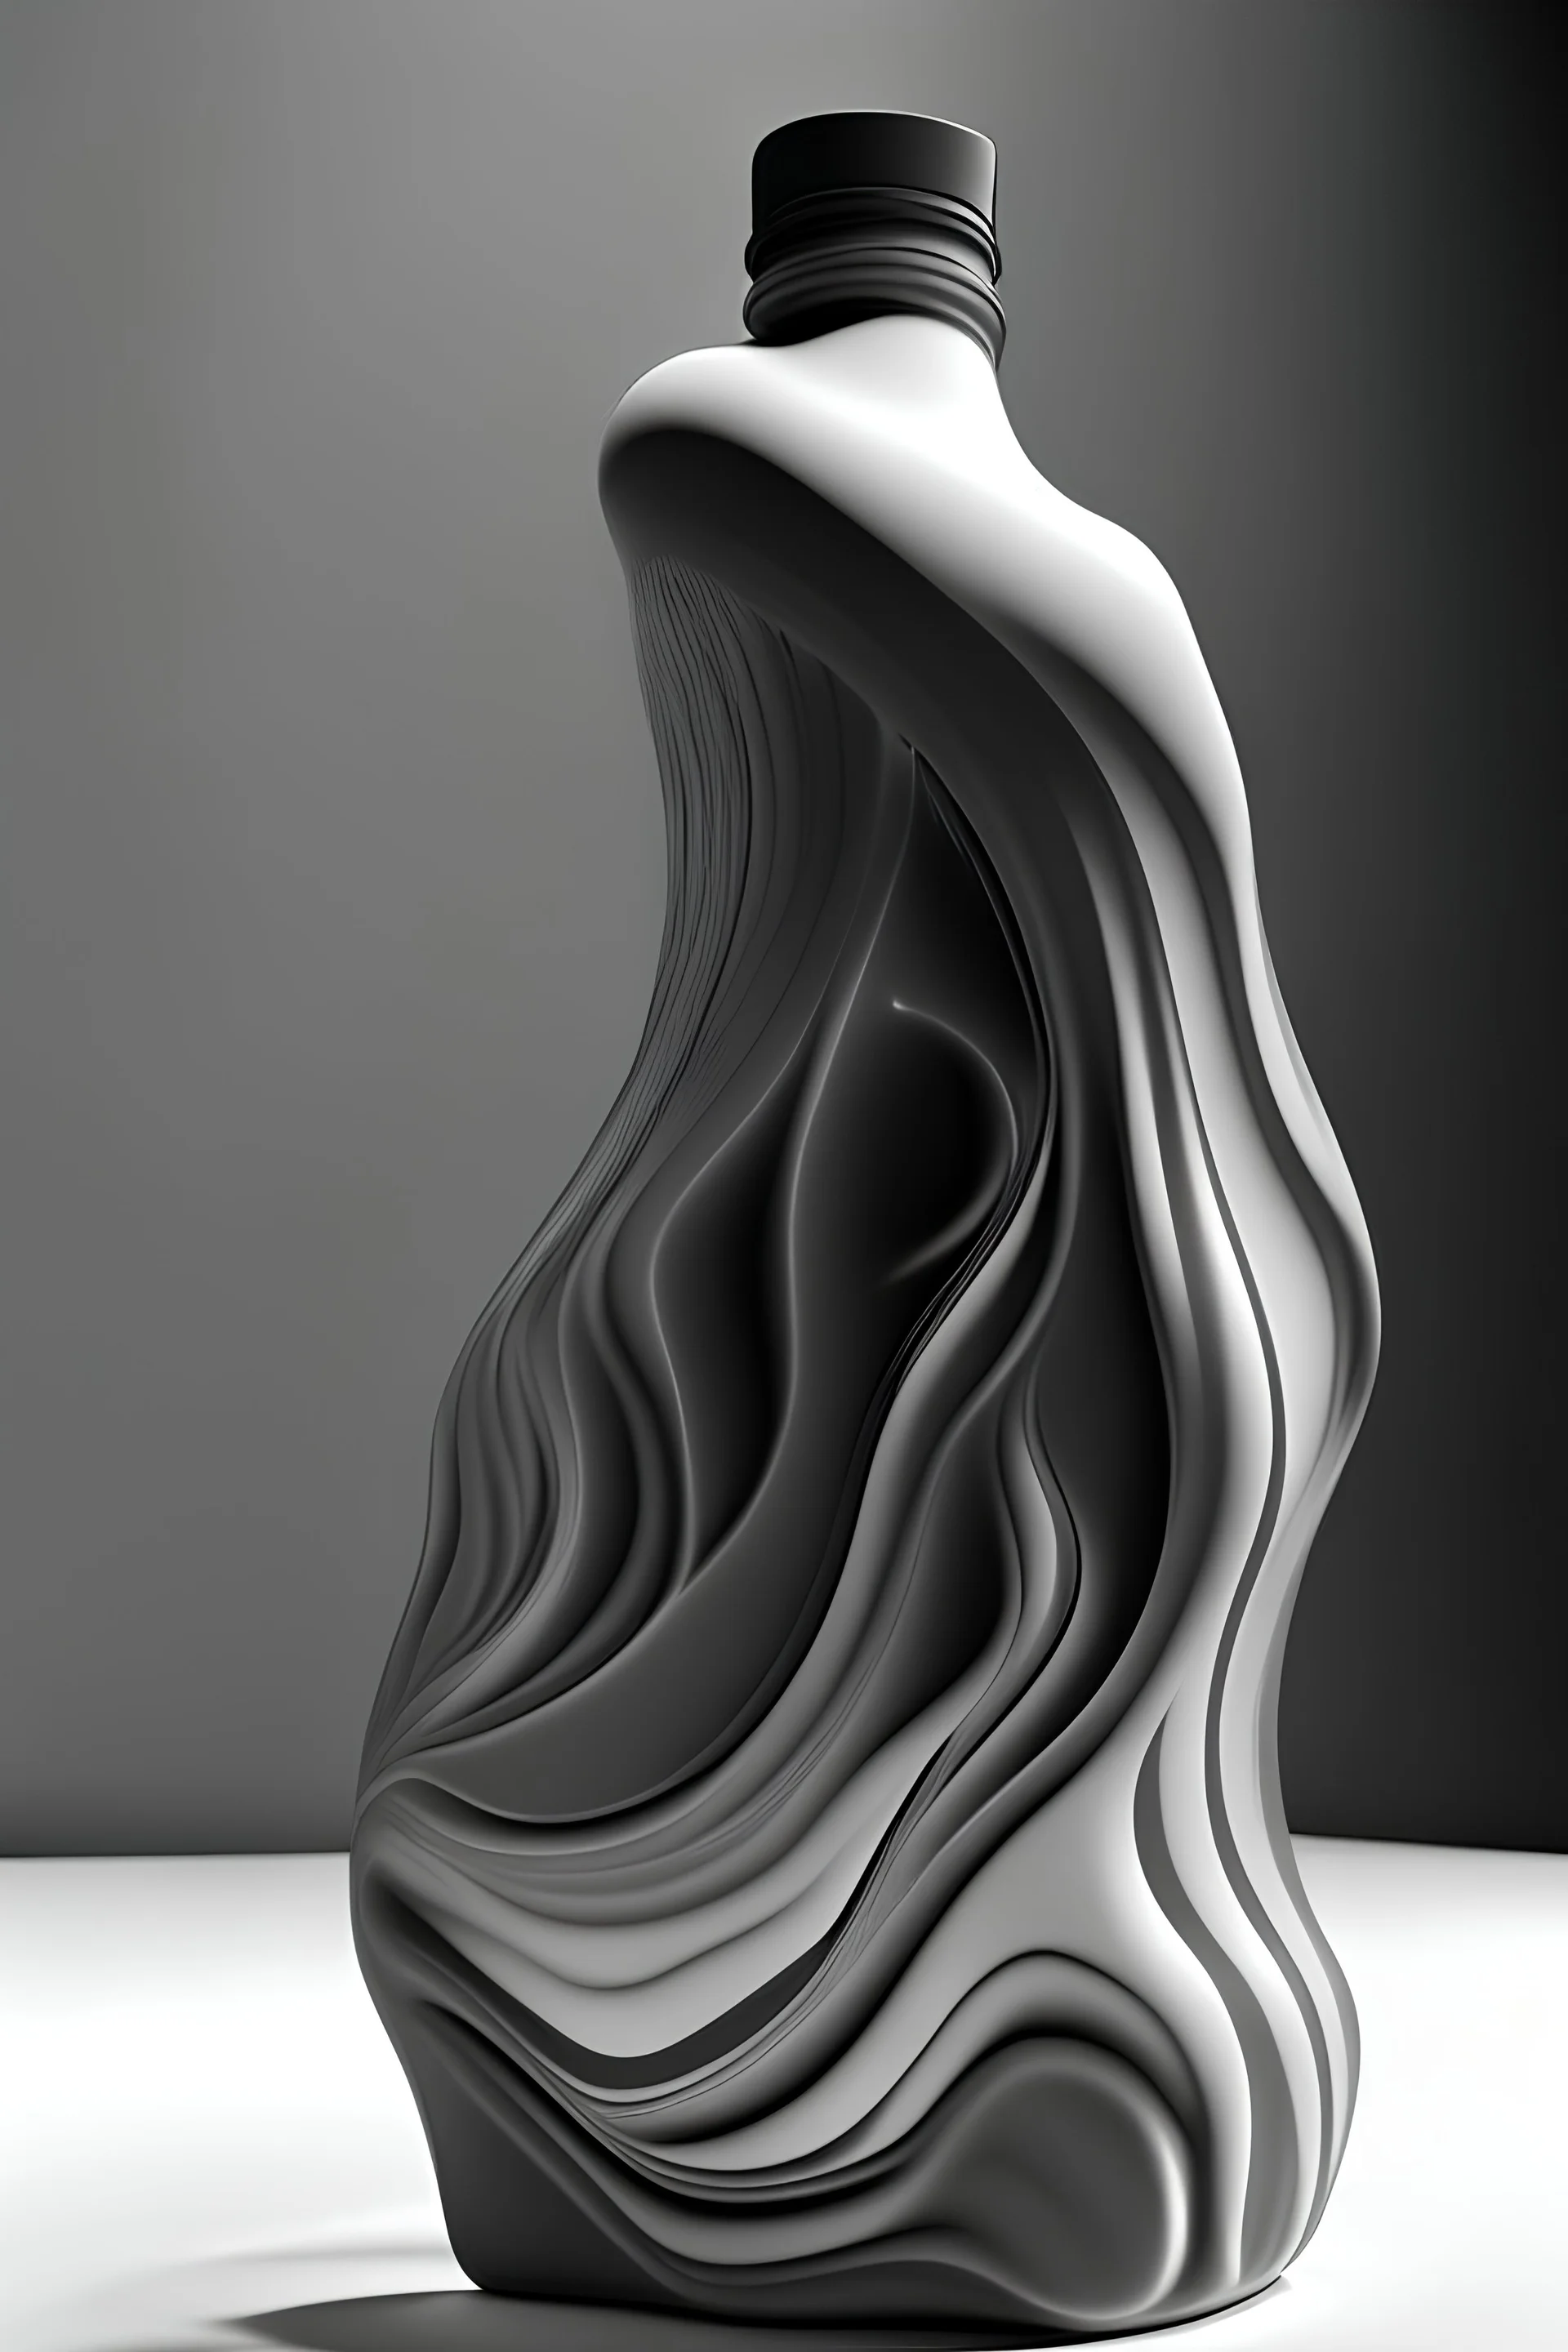 square size, lubricant oil plastic bottle, Sculpt the shape of the bottle to mimic the flow and movement of liquid. You could create wave-like contours or fluid curves along the surface, evoking a sense of dynamism and visually representing the nature of lubricants.. style render sketch gray